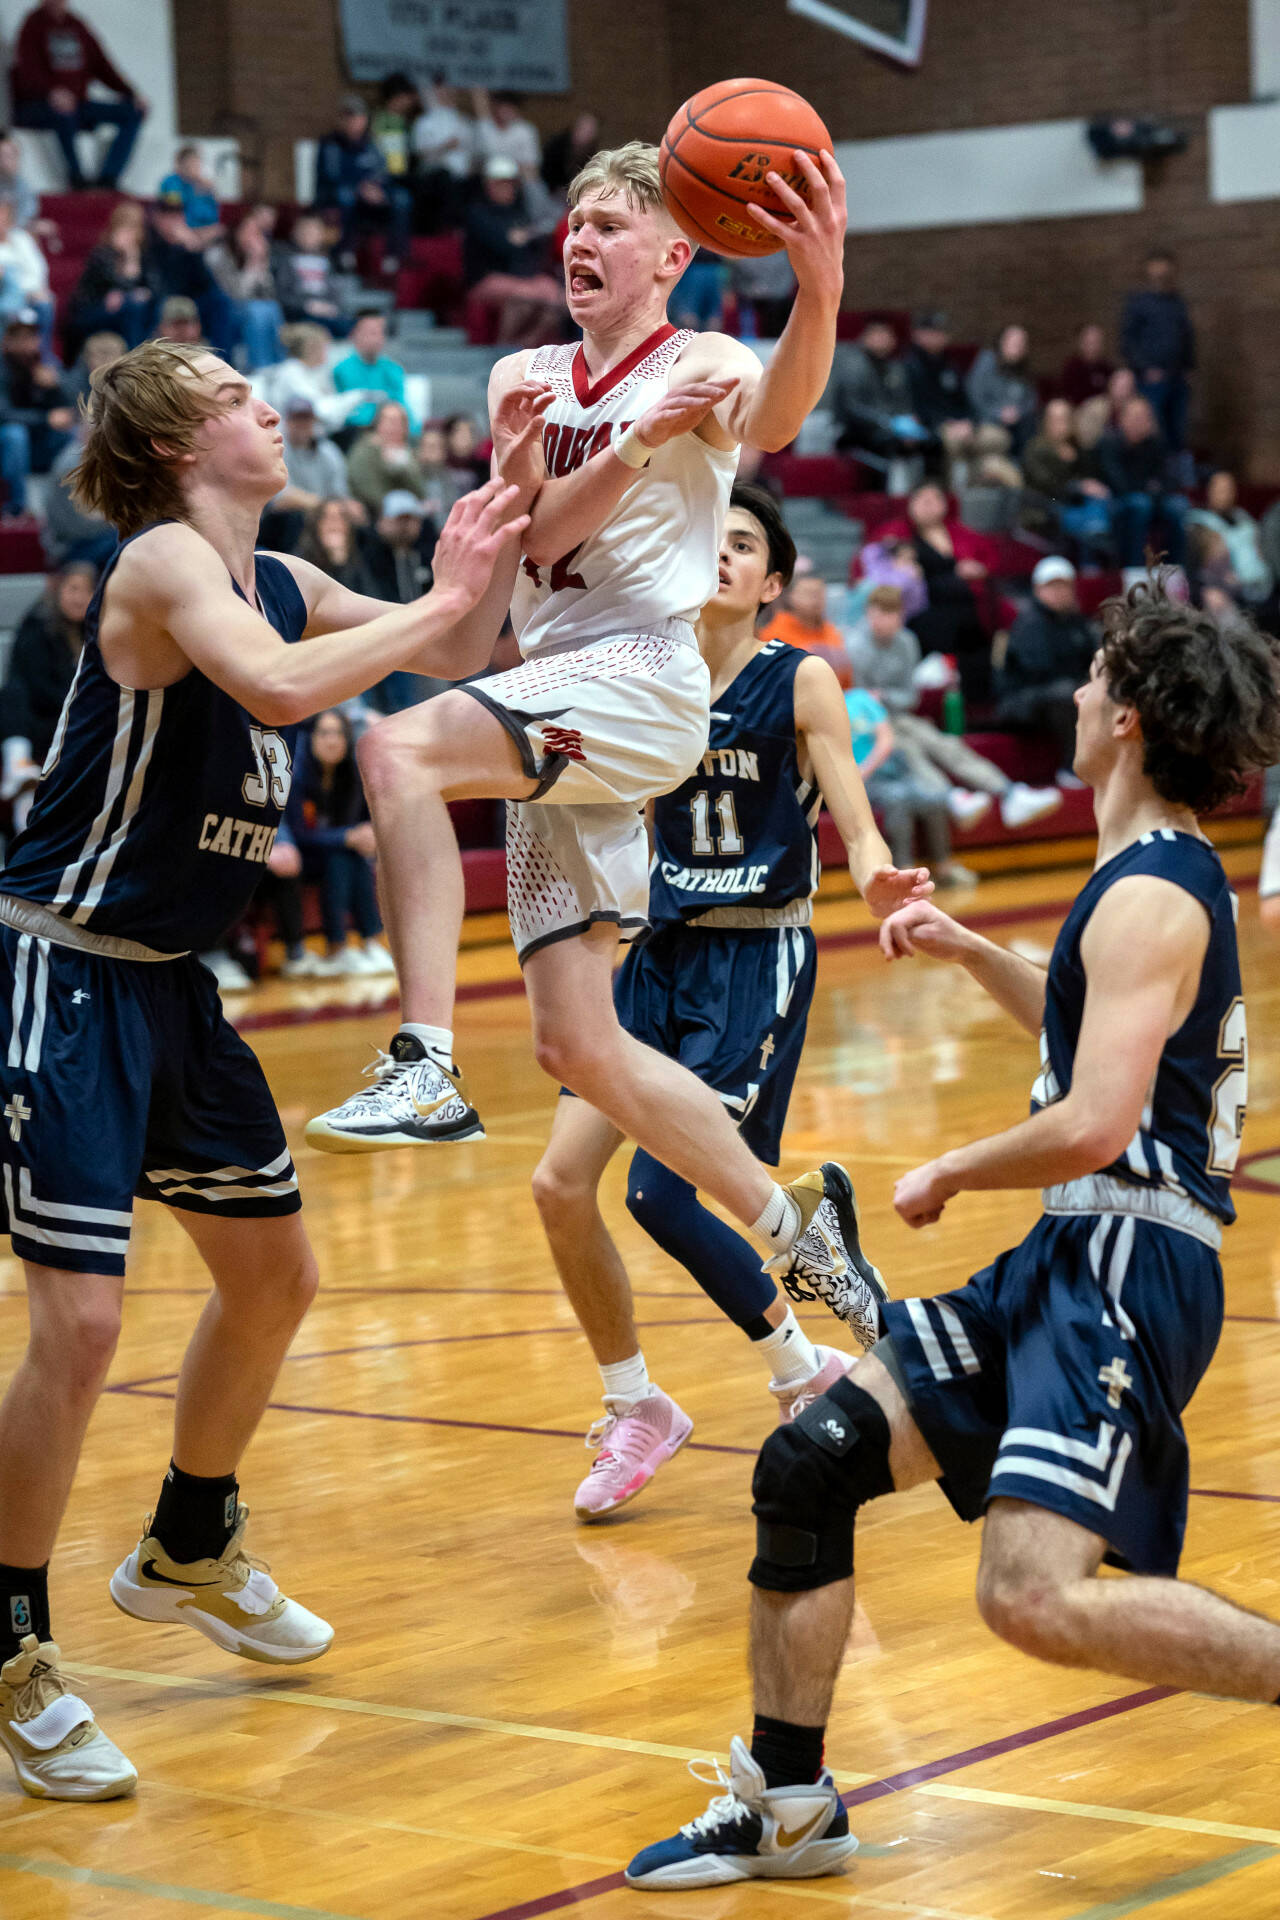 PHOTO BY FOREST WORGUM Hoquiam senior guard Micael Lorton Watkins attacks the Seton Catholic defense during a 63-45 loss in a 1A District 4 Tournament elimination game on Thursday in Montesano.